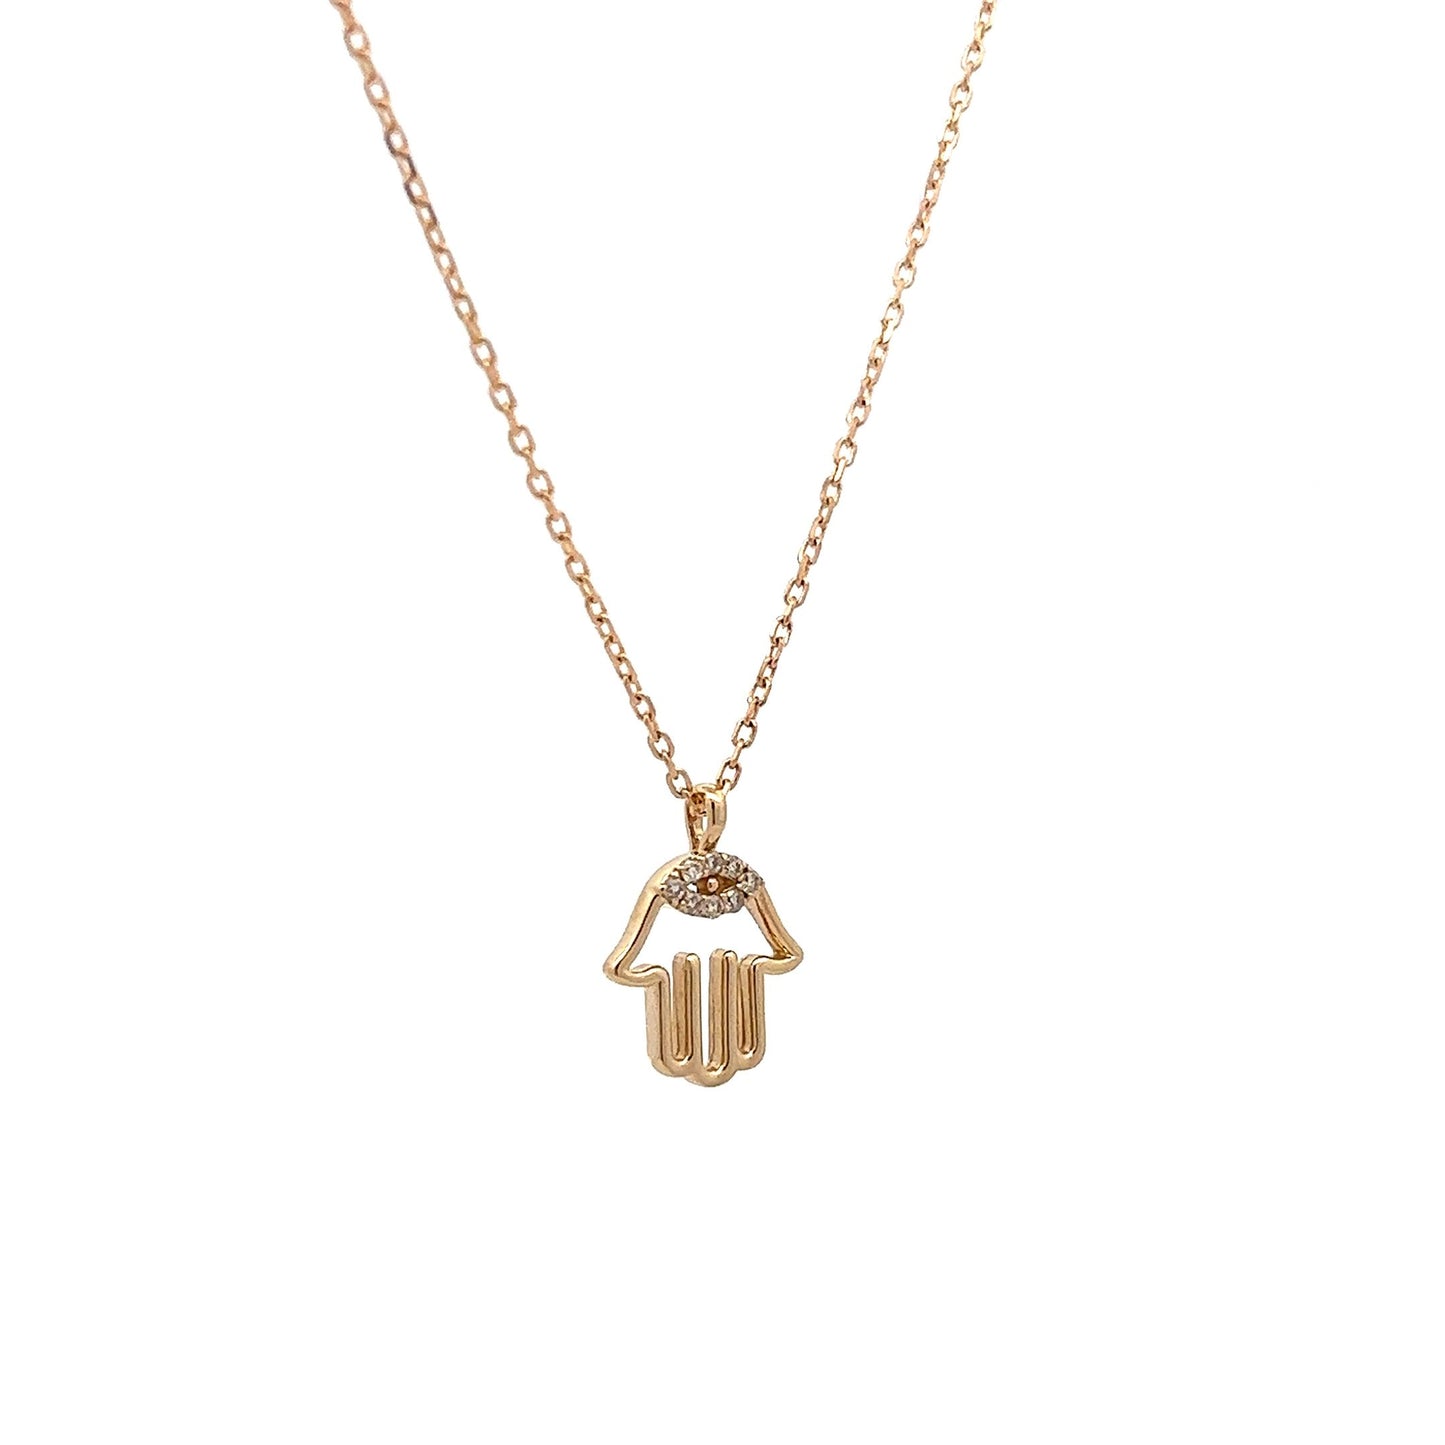 Hamsa Charm Necklace in 14k Yellow Gold